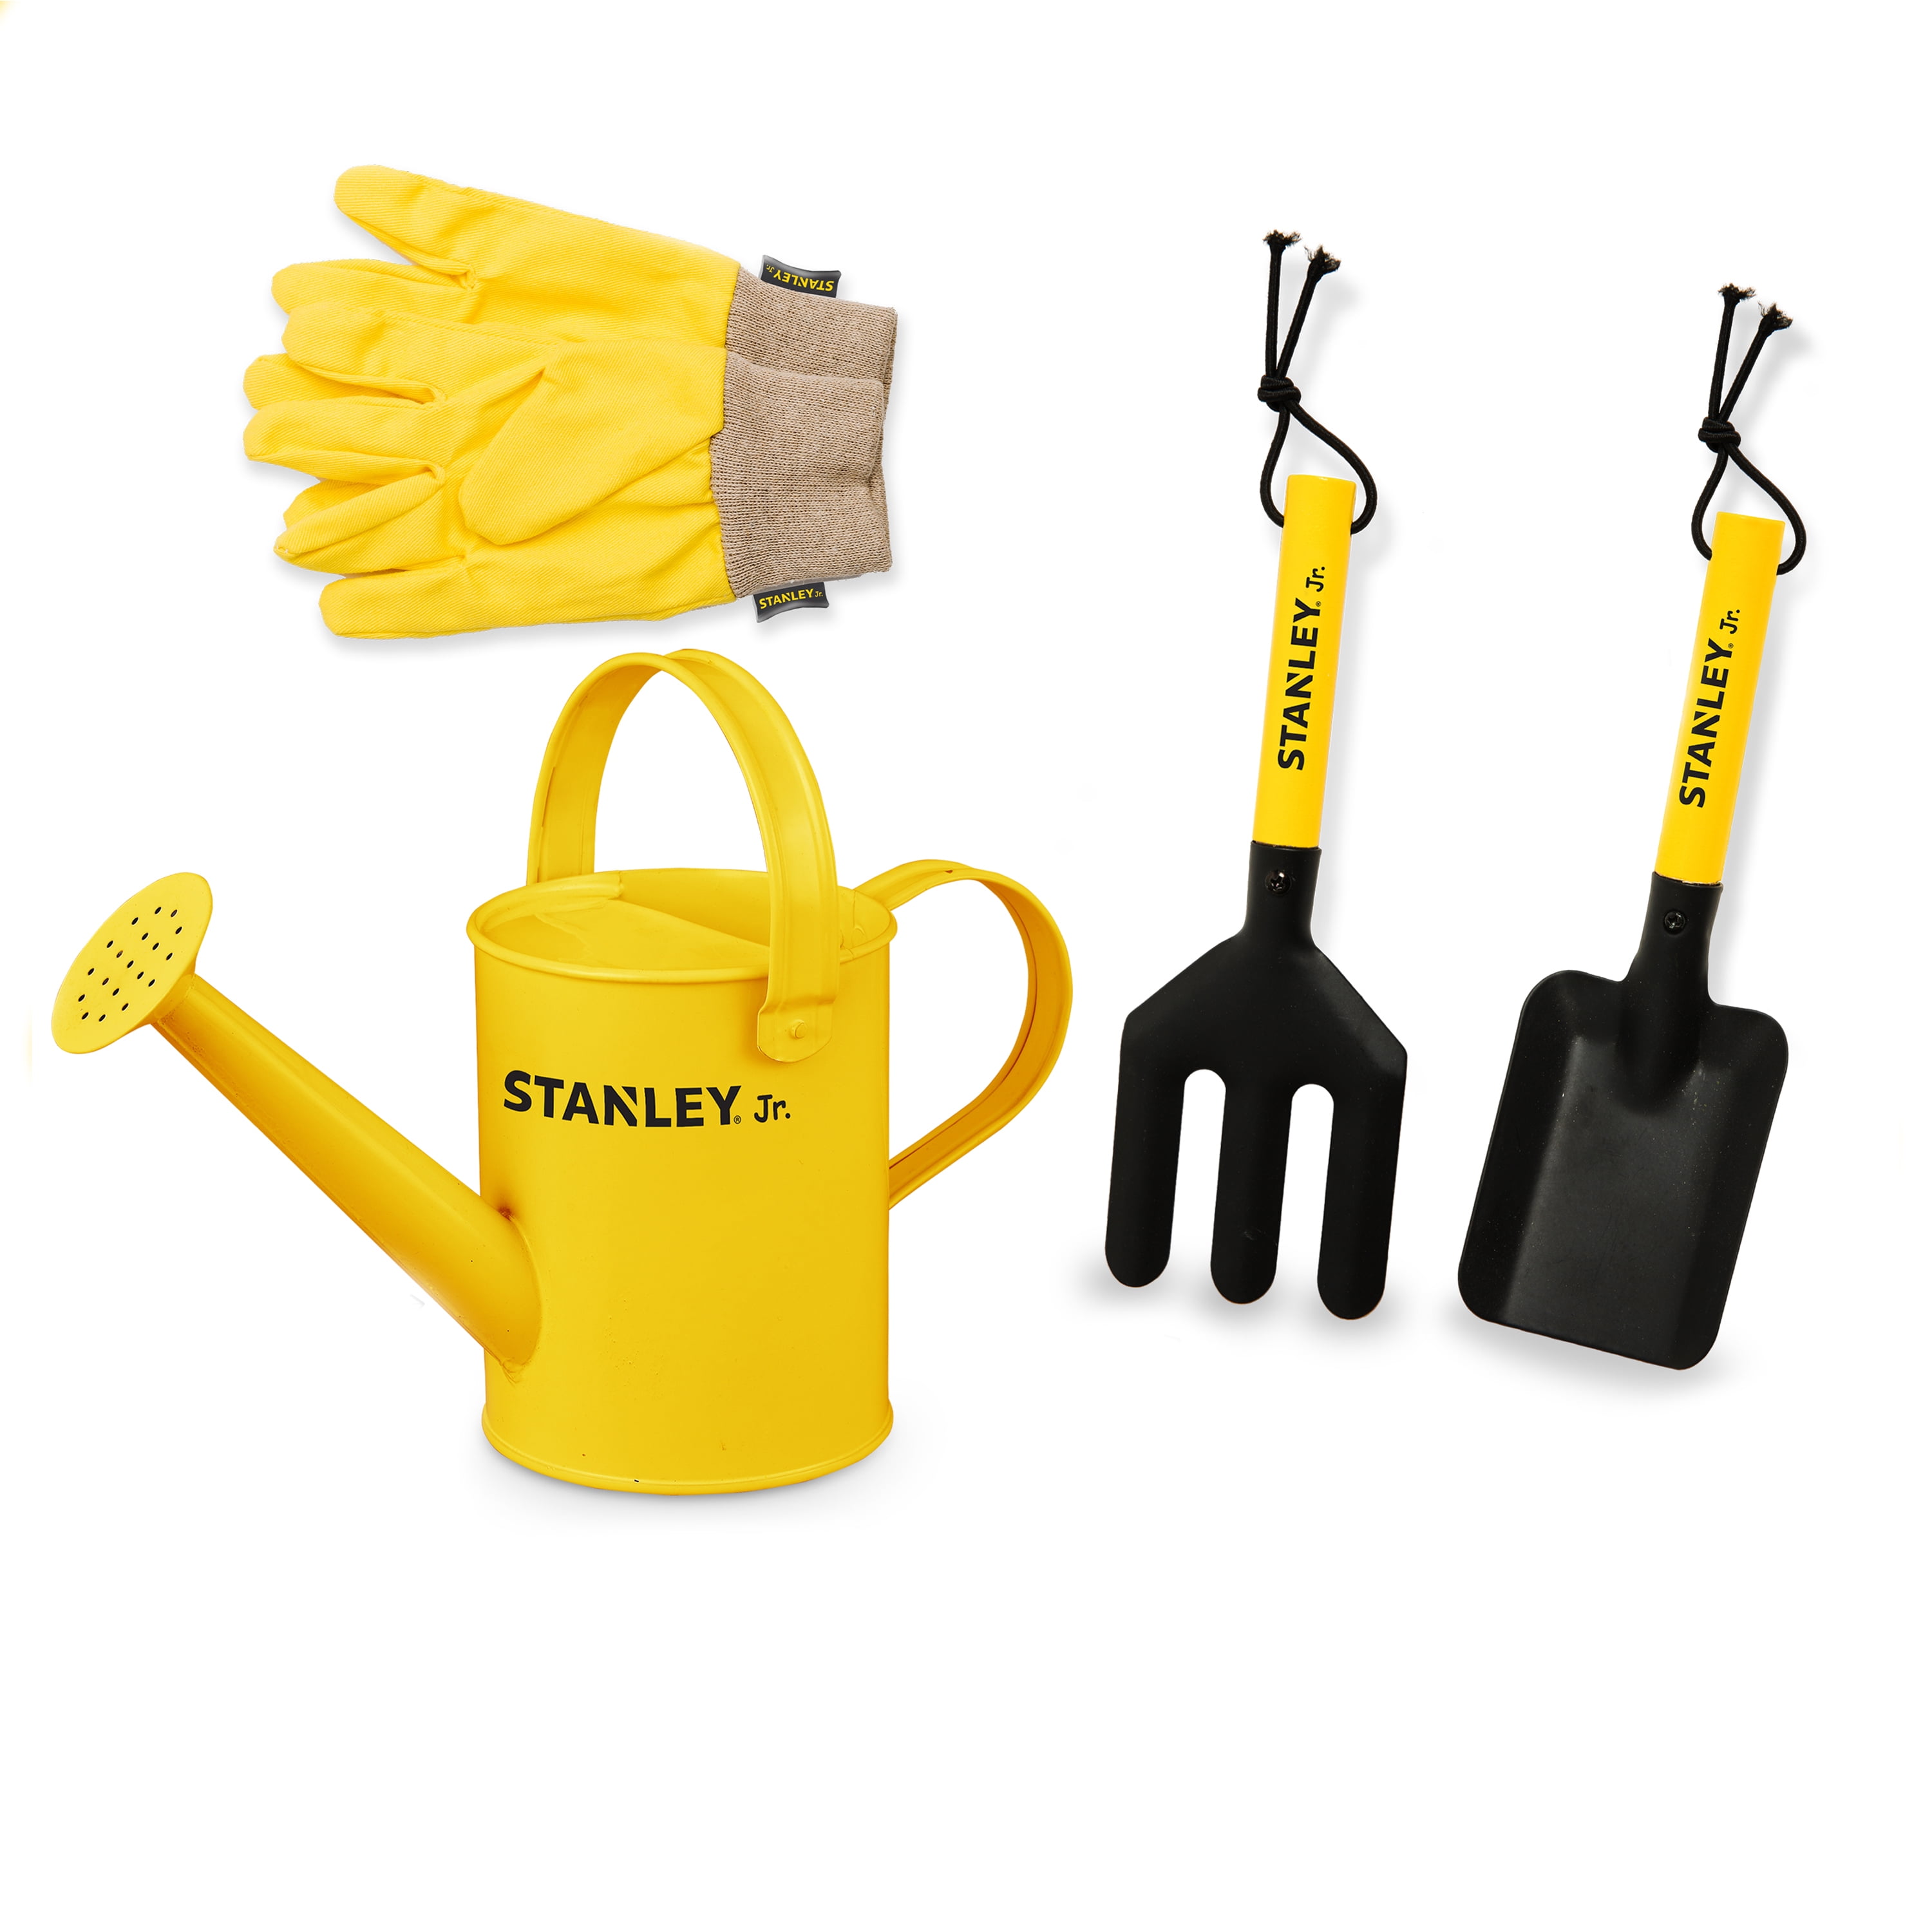 Stanley Jr - 4-Piece Garden Hand Tool Set with Gloves for Kids